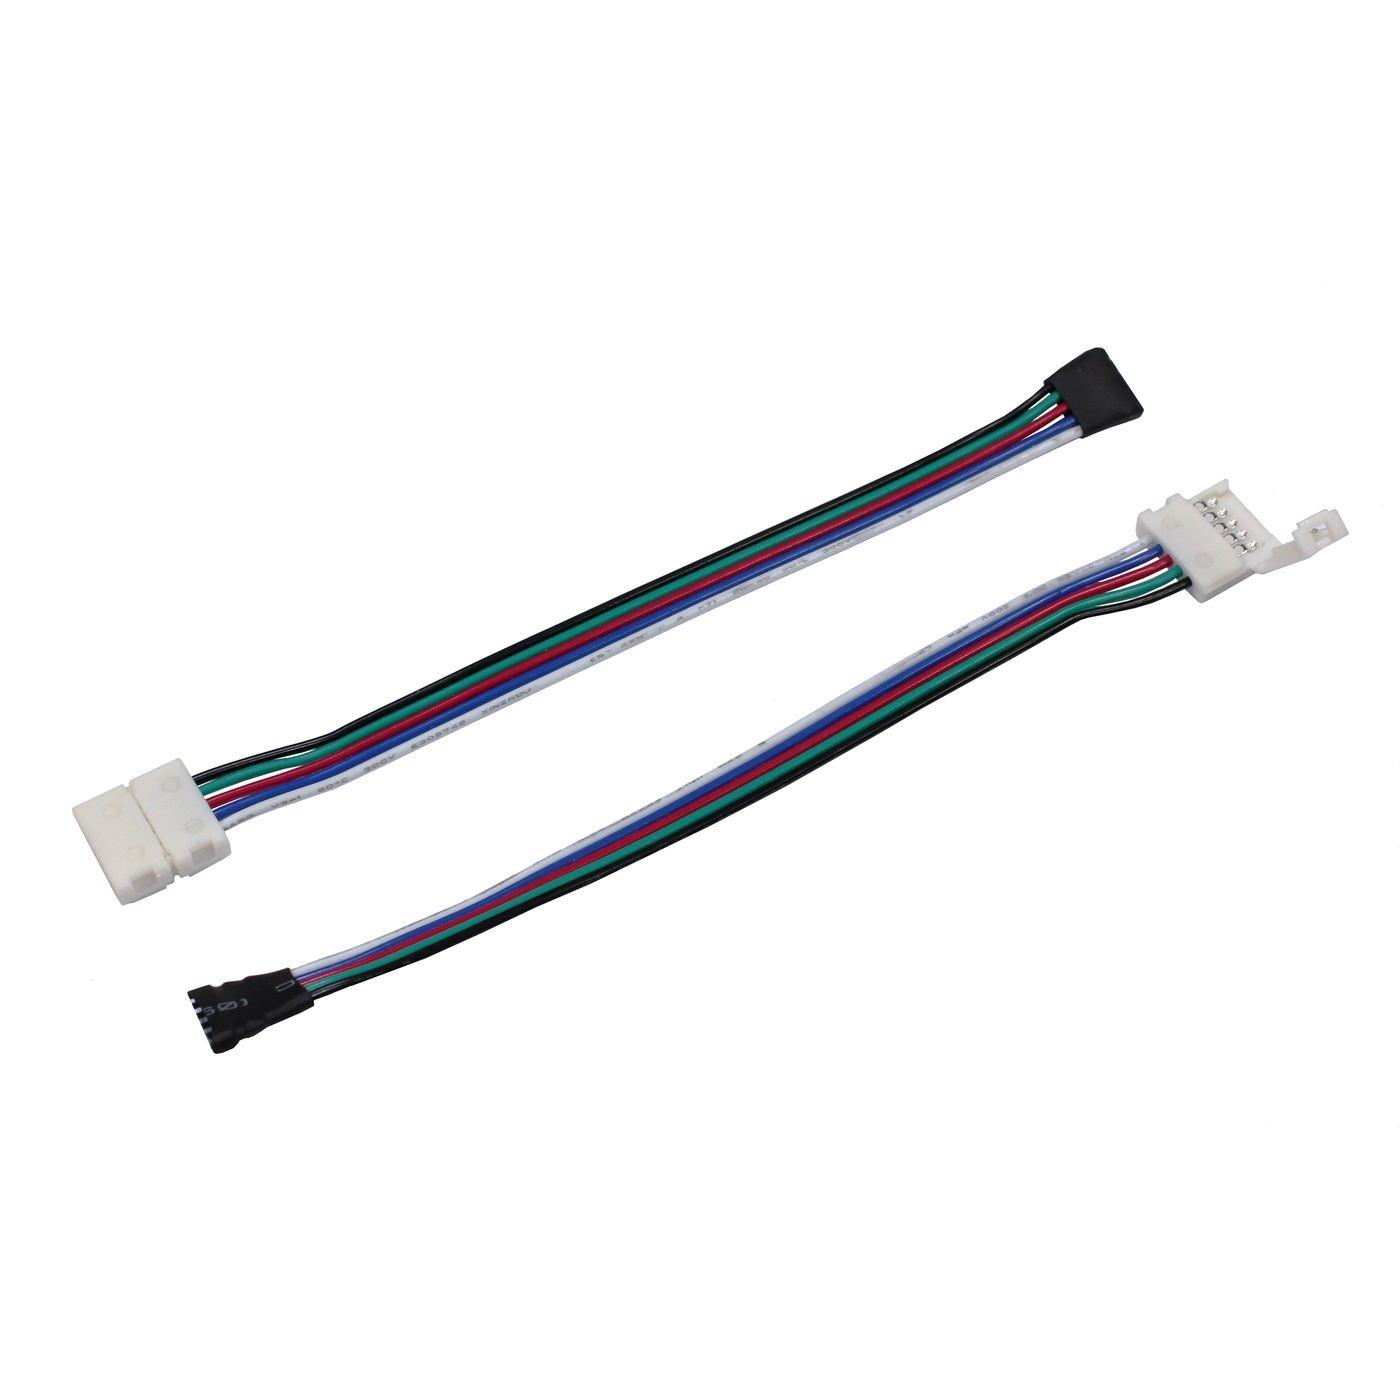 17cm RGBW LED Connector -> Clip Quick connector 5 Pin Socket -> Clip for 12mm RGBW LED Strip 17x5mm